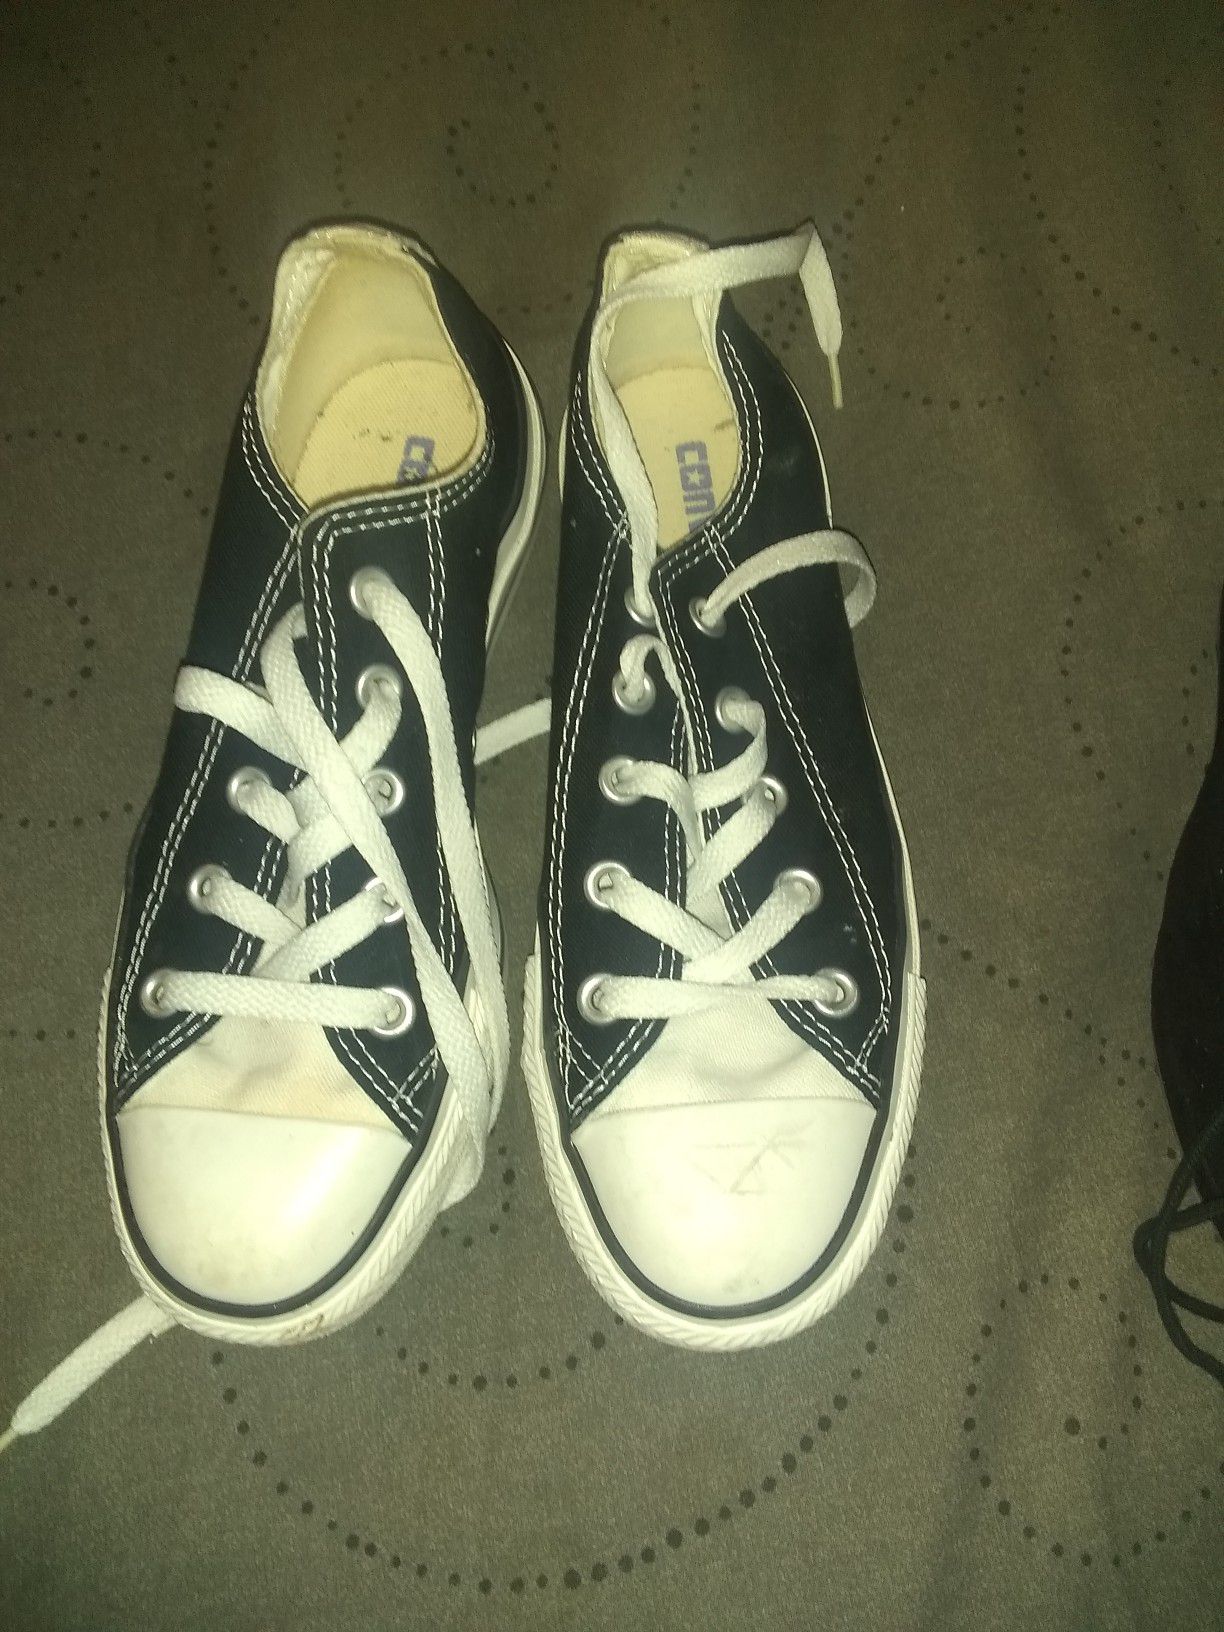 Black and White Converse All Stars